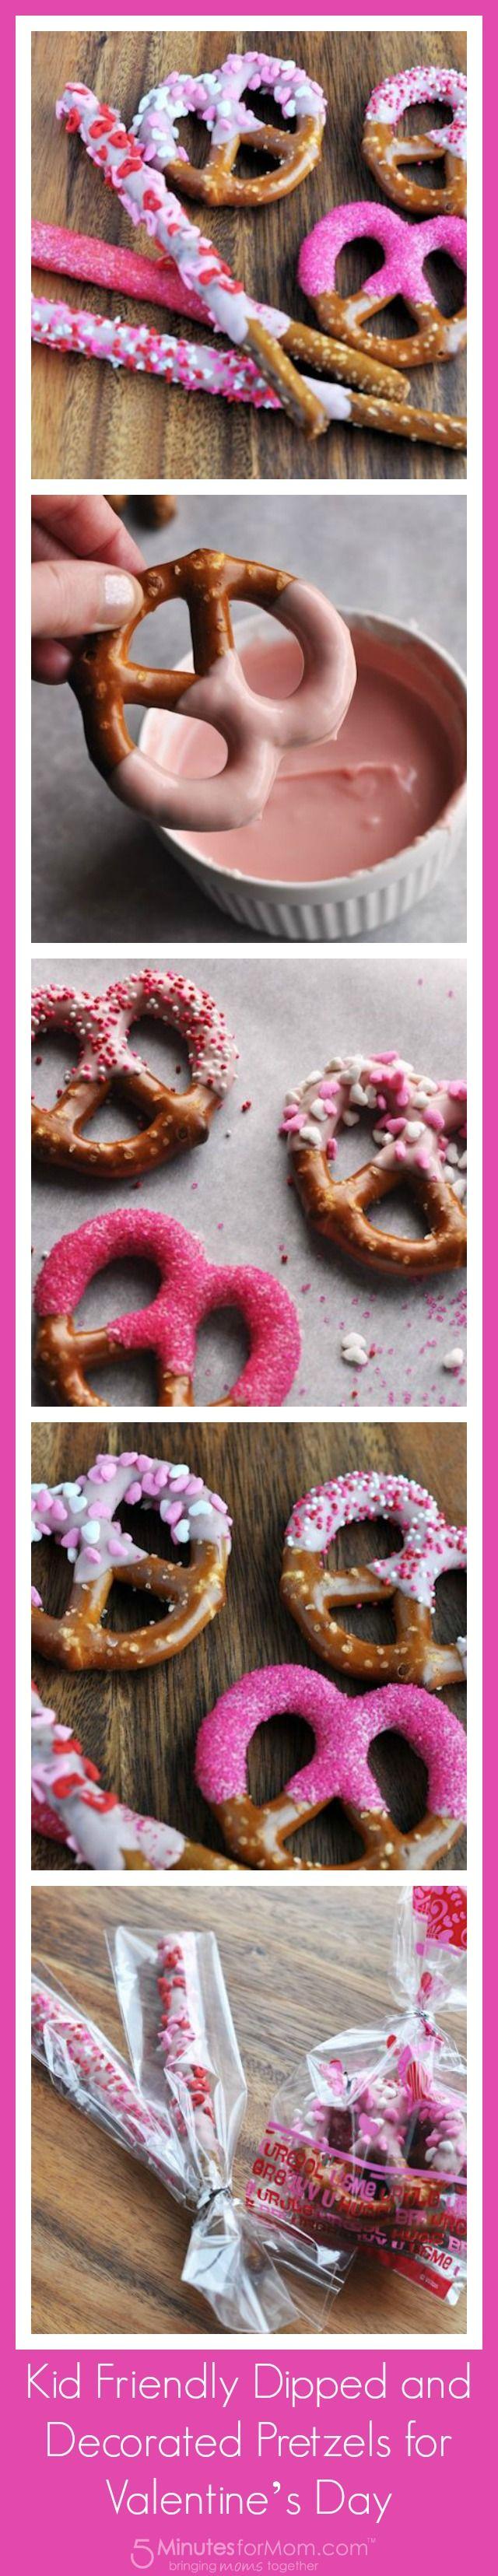 Hochzeit - Kid Friendly Dipped And Decorated Pretzels For Valentine's Day